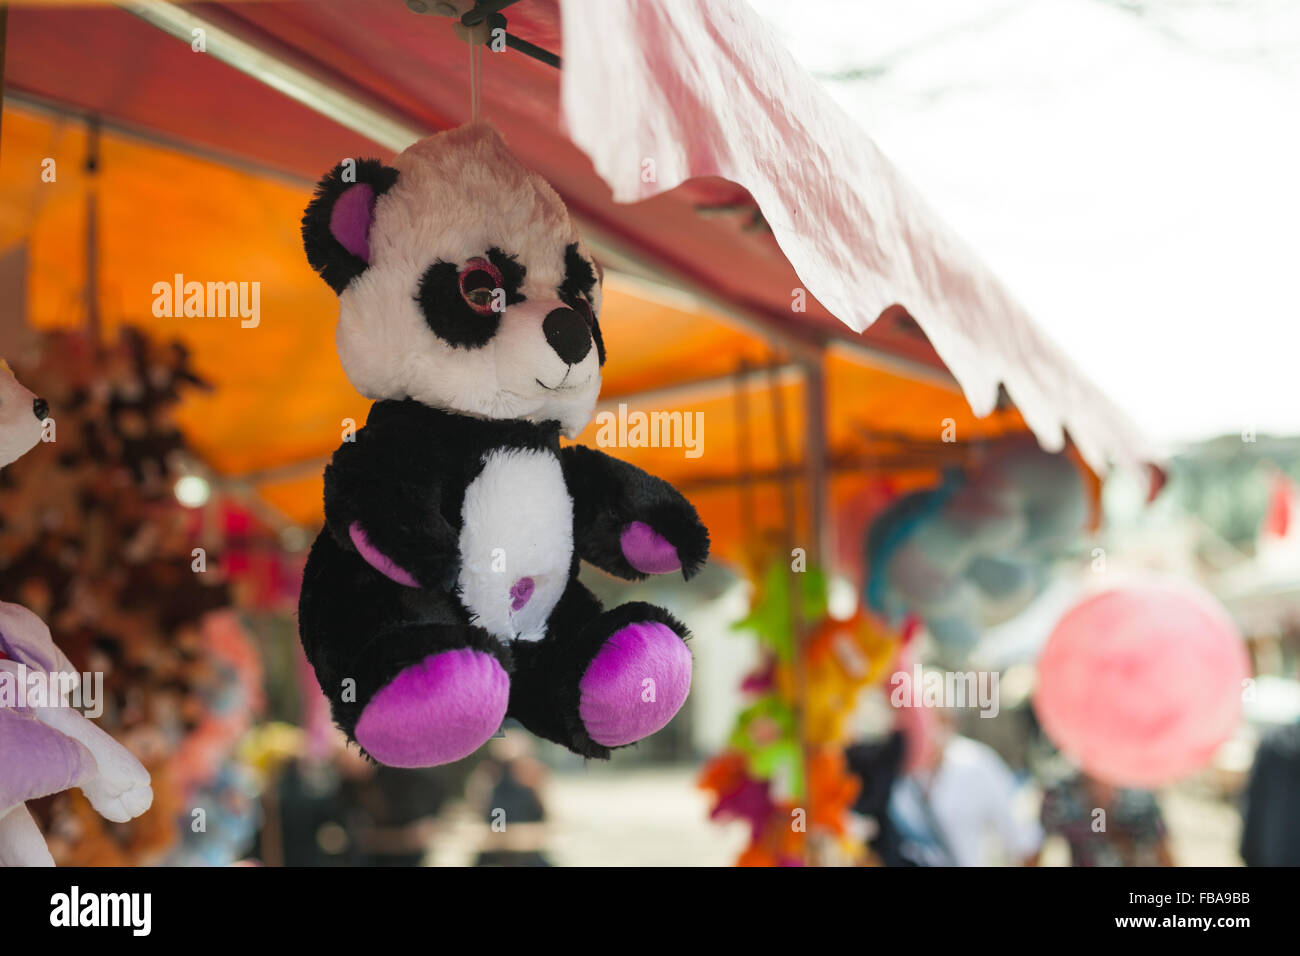 Stuffed bear hanging at a fairgrounds as a prize Stock Photo